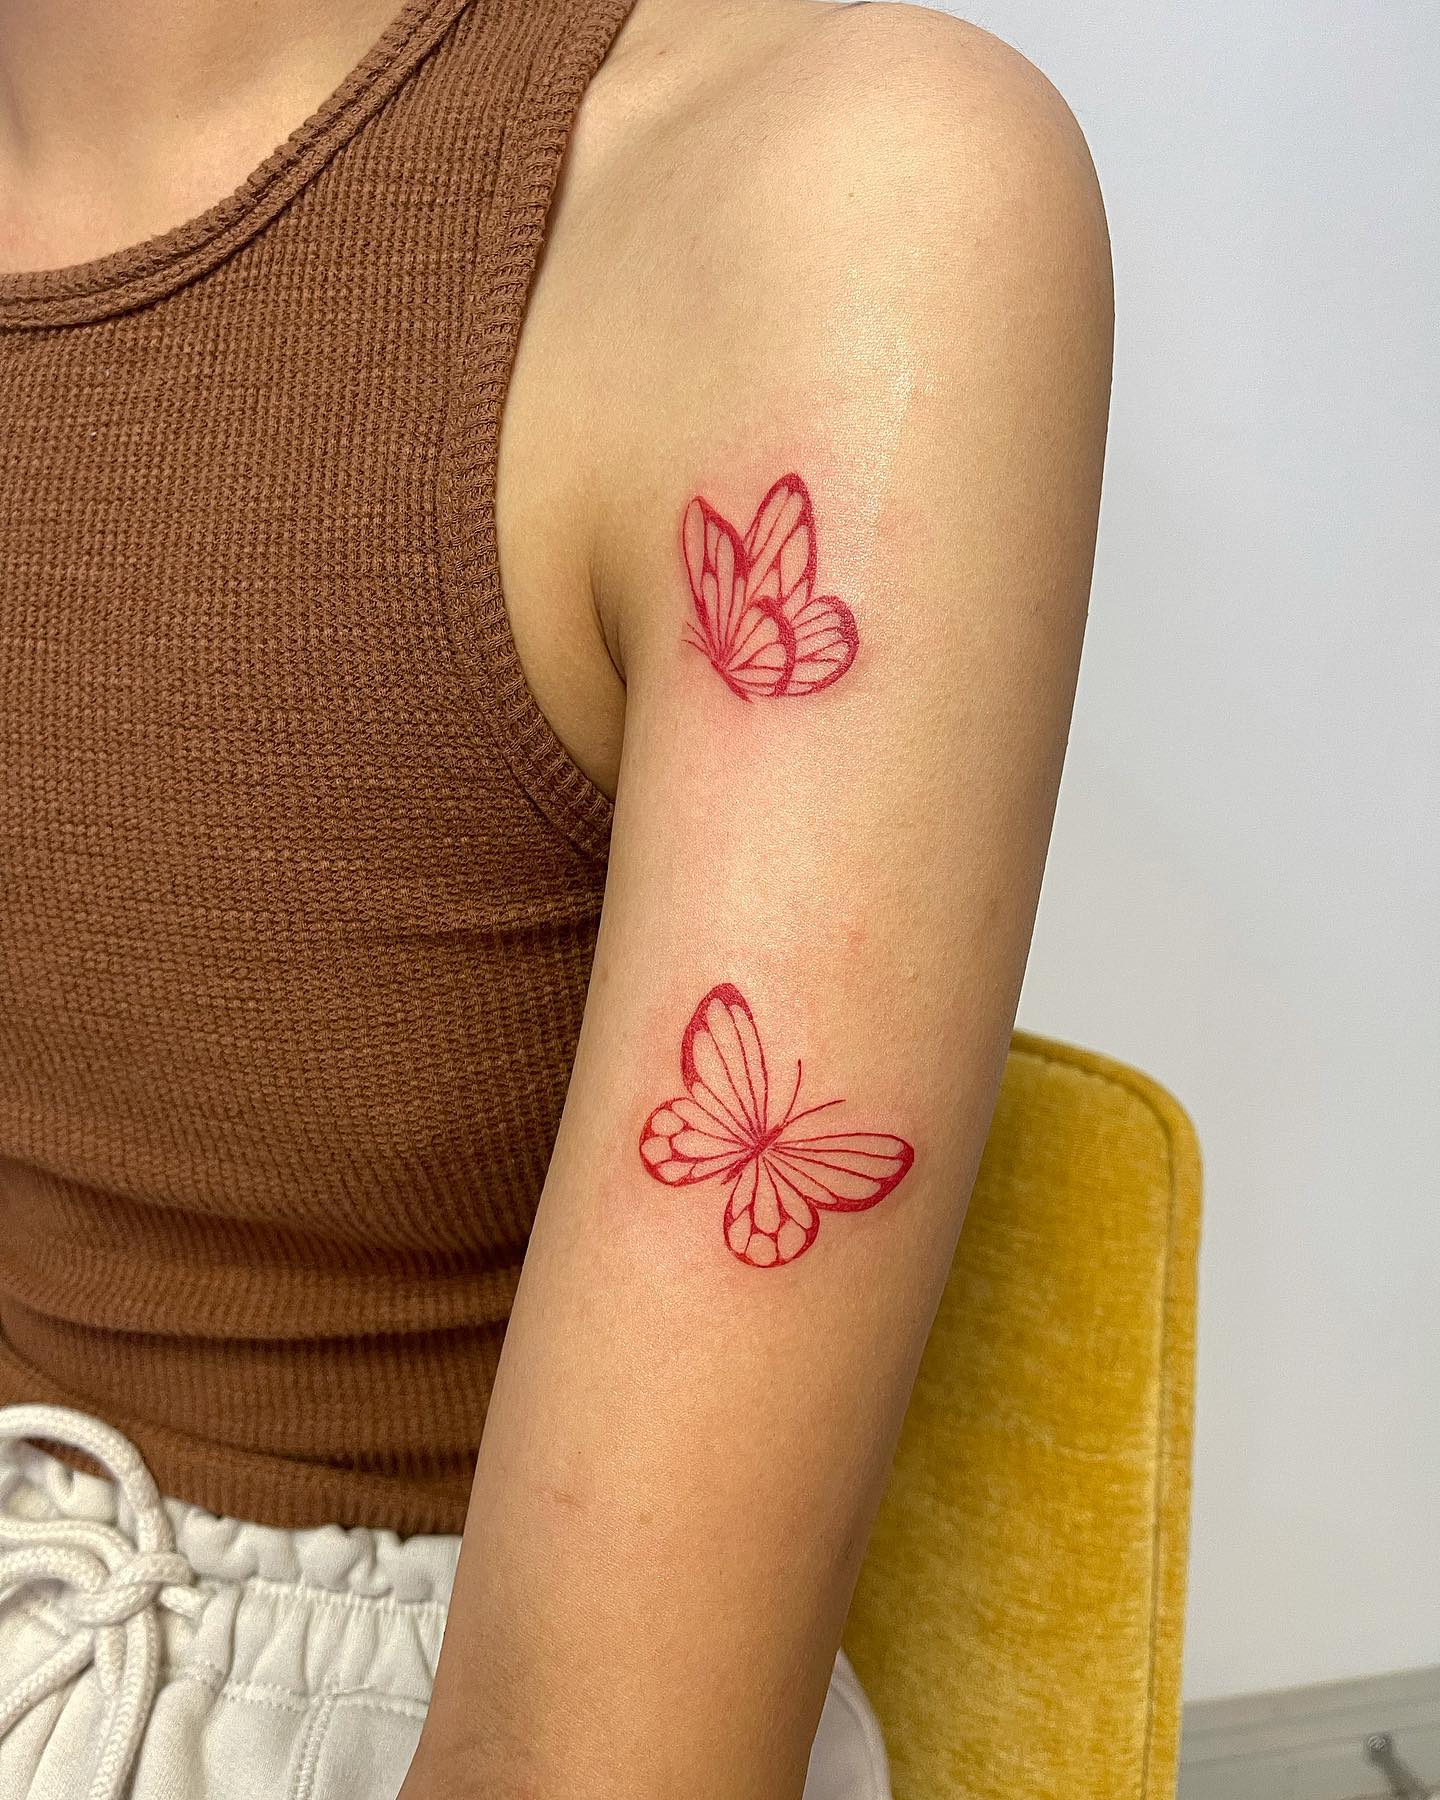 Two red butterflies tattoo